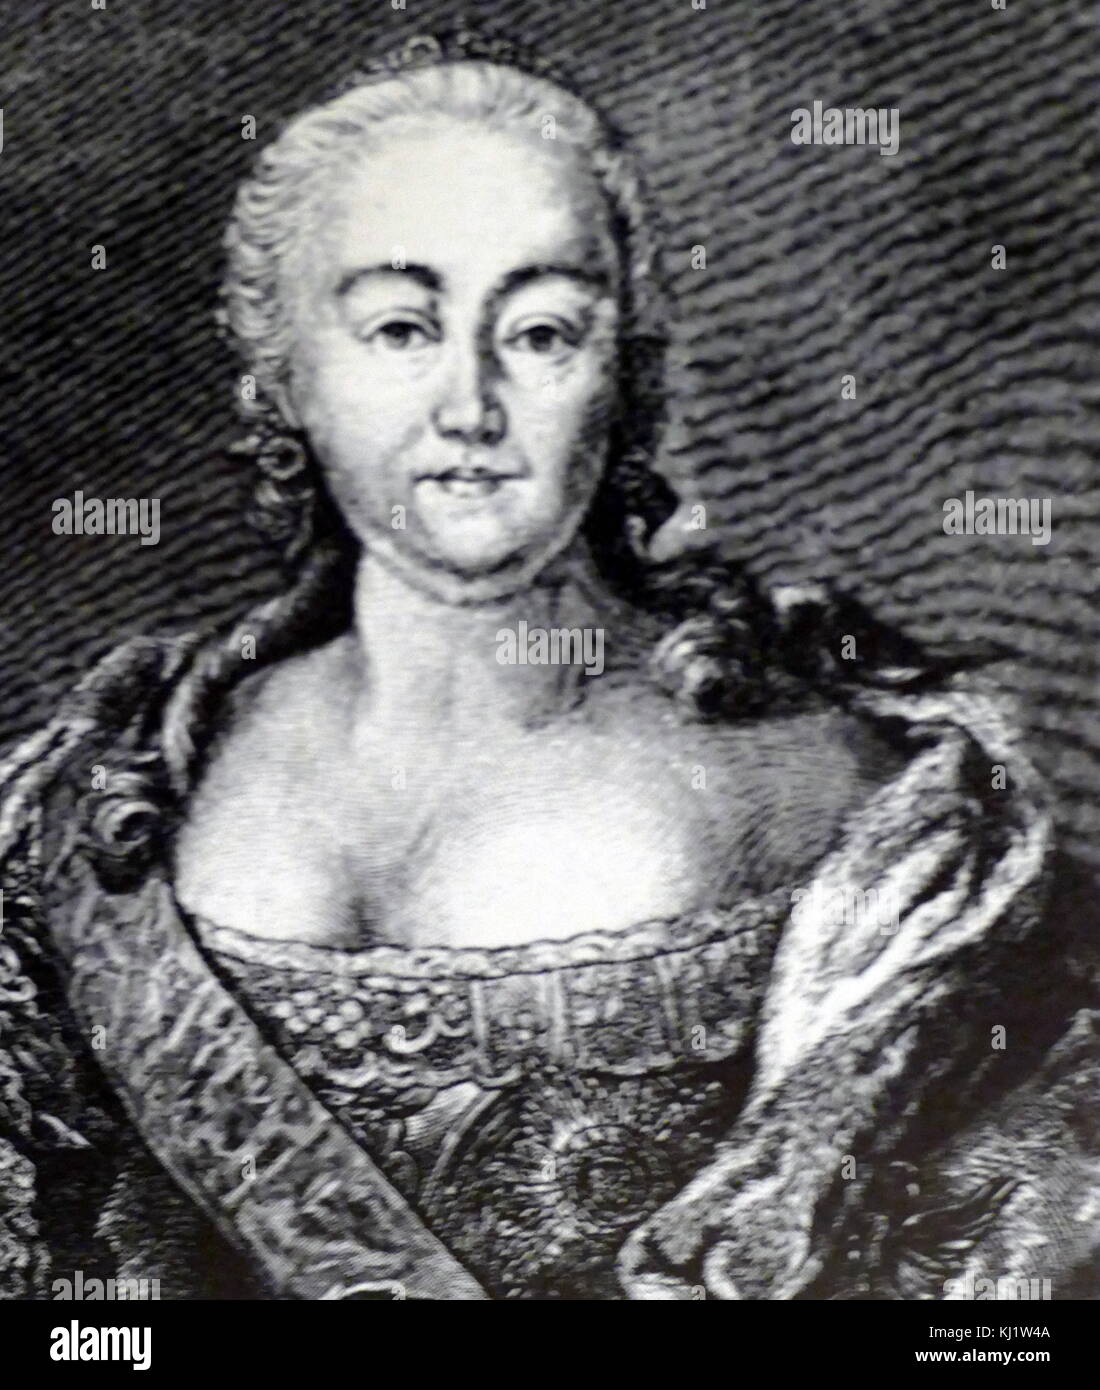 Engraved portrait of Elizabeth of Russia (1709-1762) Empress of Russia. Dated 18th Century Stock Photo